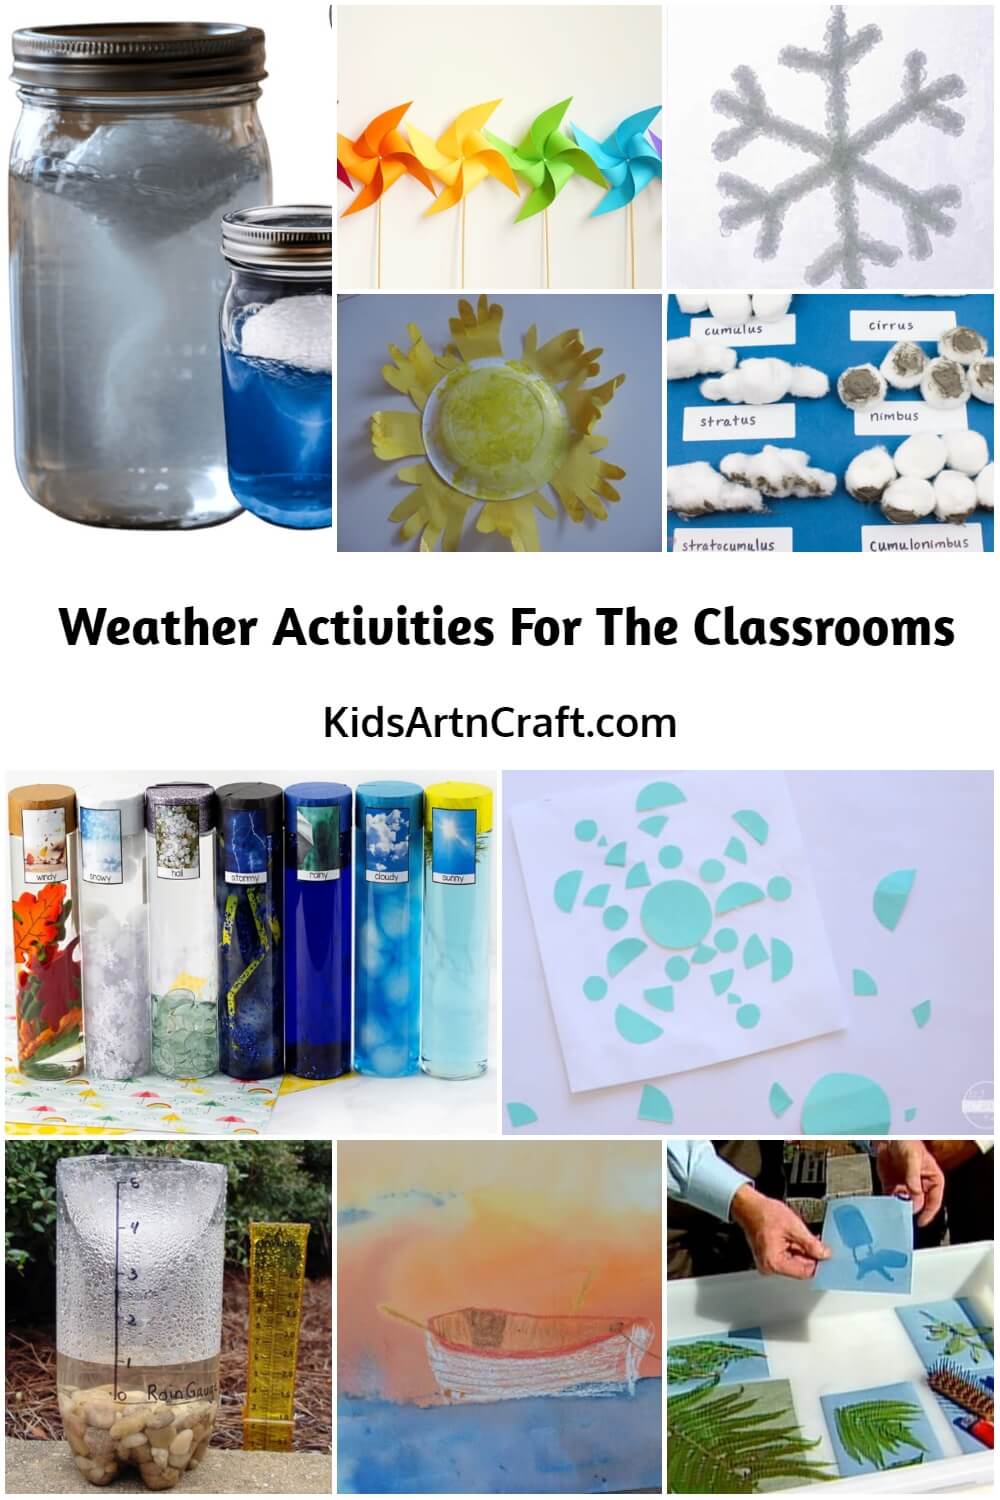 Weather Activities For the classroom